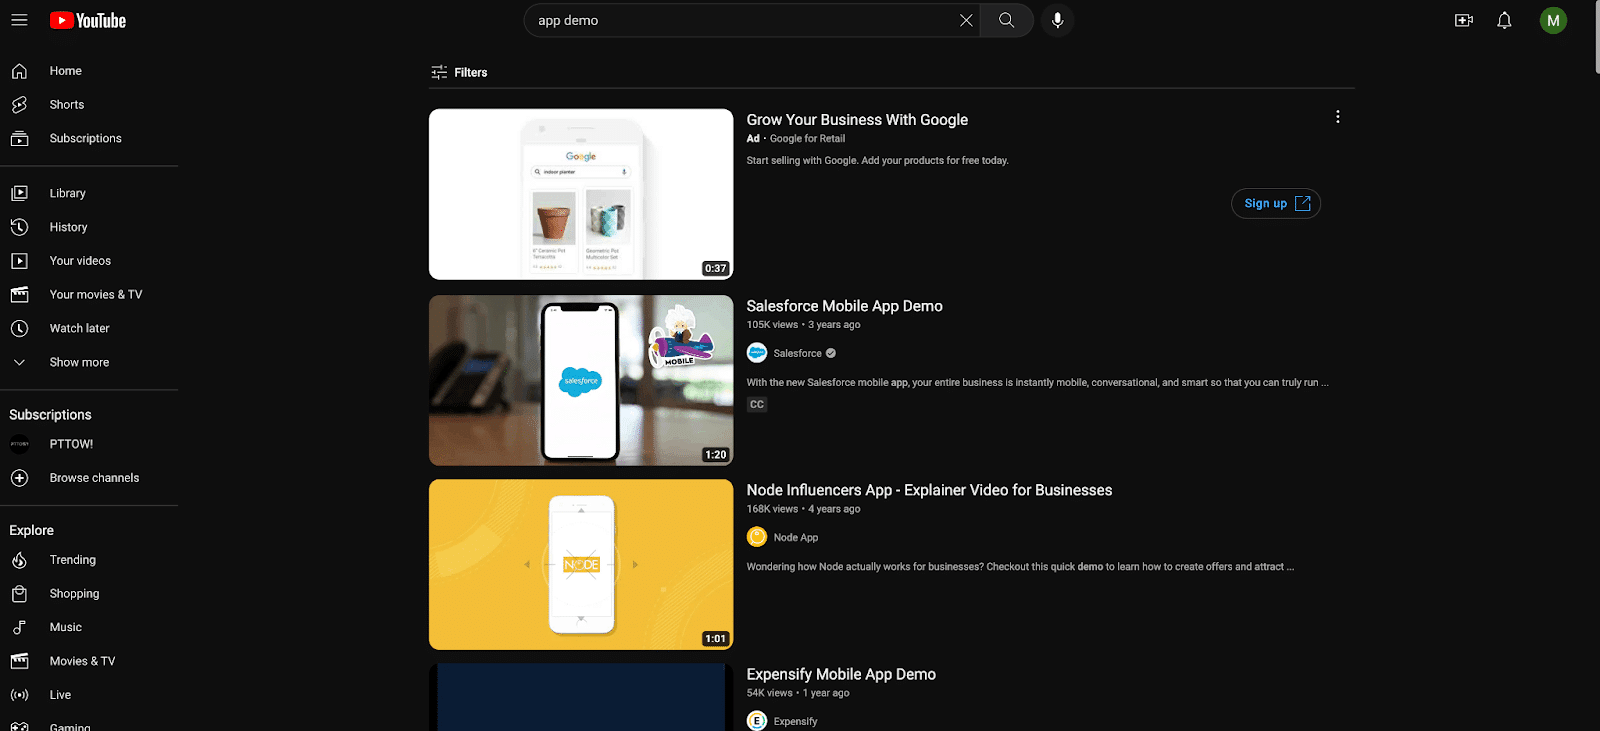 Video-tiles-on-YouTube-Homepage